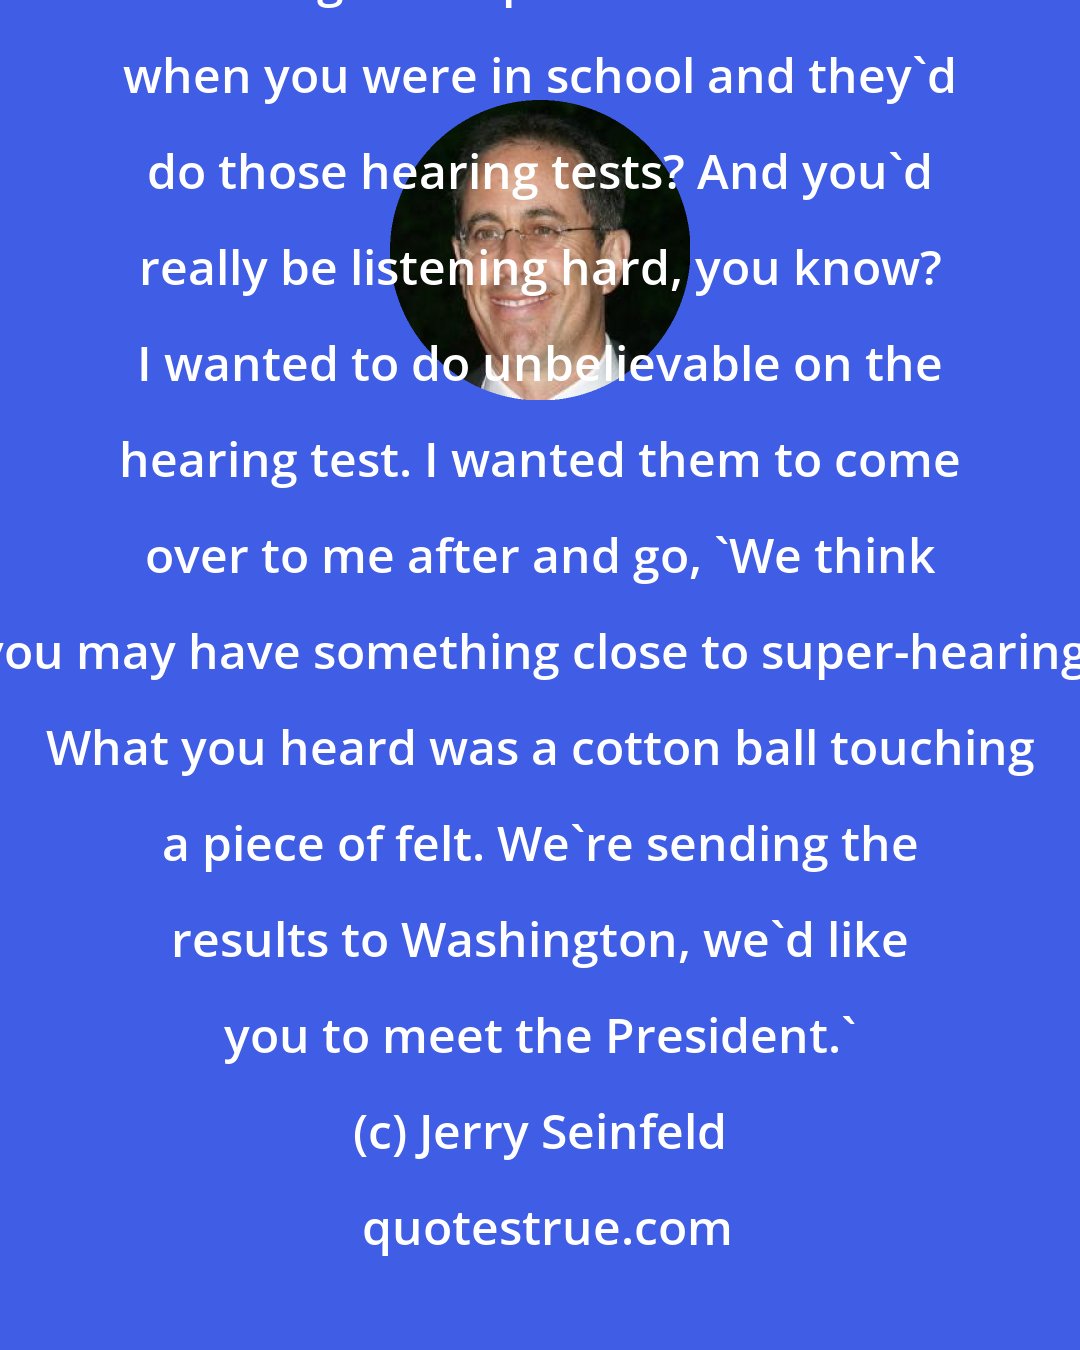 Jerry Seinfeld: With any kind of physical test, I don't know what it is, I always seem to get competitive. Remember when you were in school and they'd do those hearing tests? And you'd really be listening hard, you know? I wanted to do unbelievable on the hearing test. I wanted them to come over to me after and go, 'We think you may have something close to super-hearing. What you heard was a cotton ball touching a piece of felt. We're sending the results to Washington, we'd like you to meet the President.'